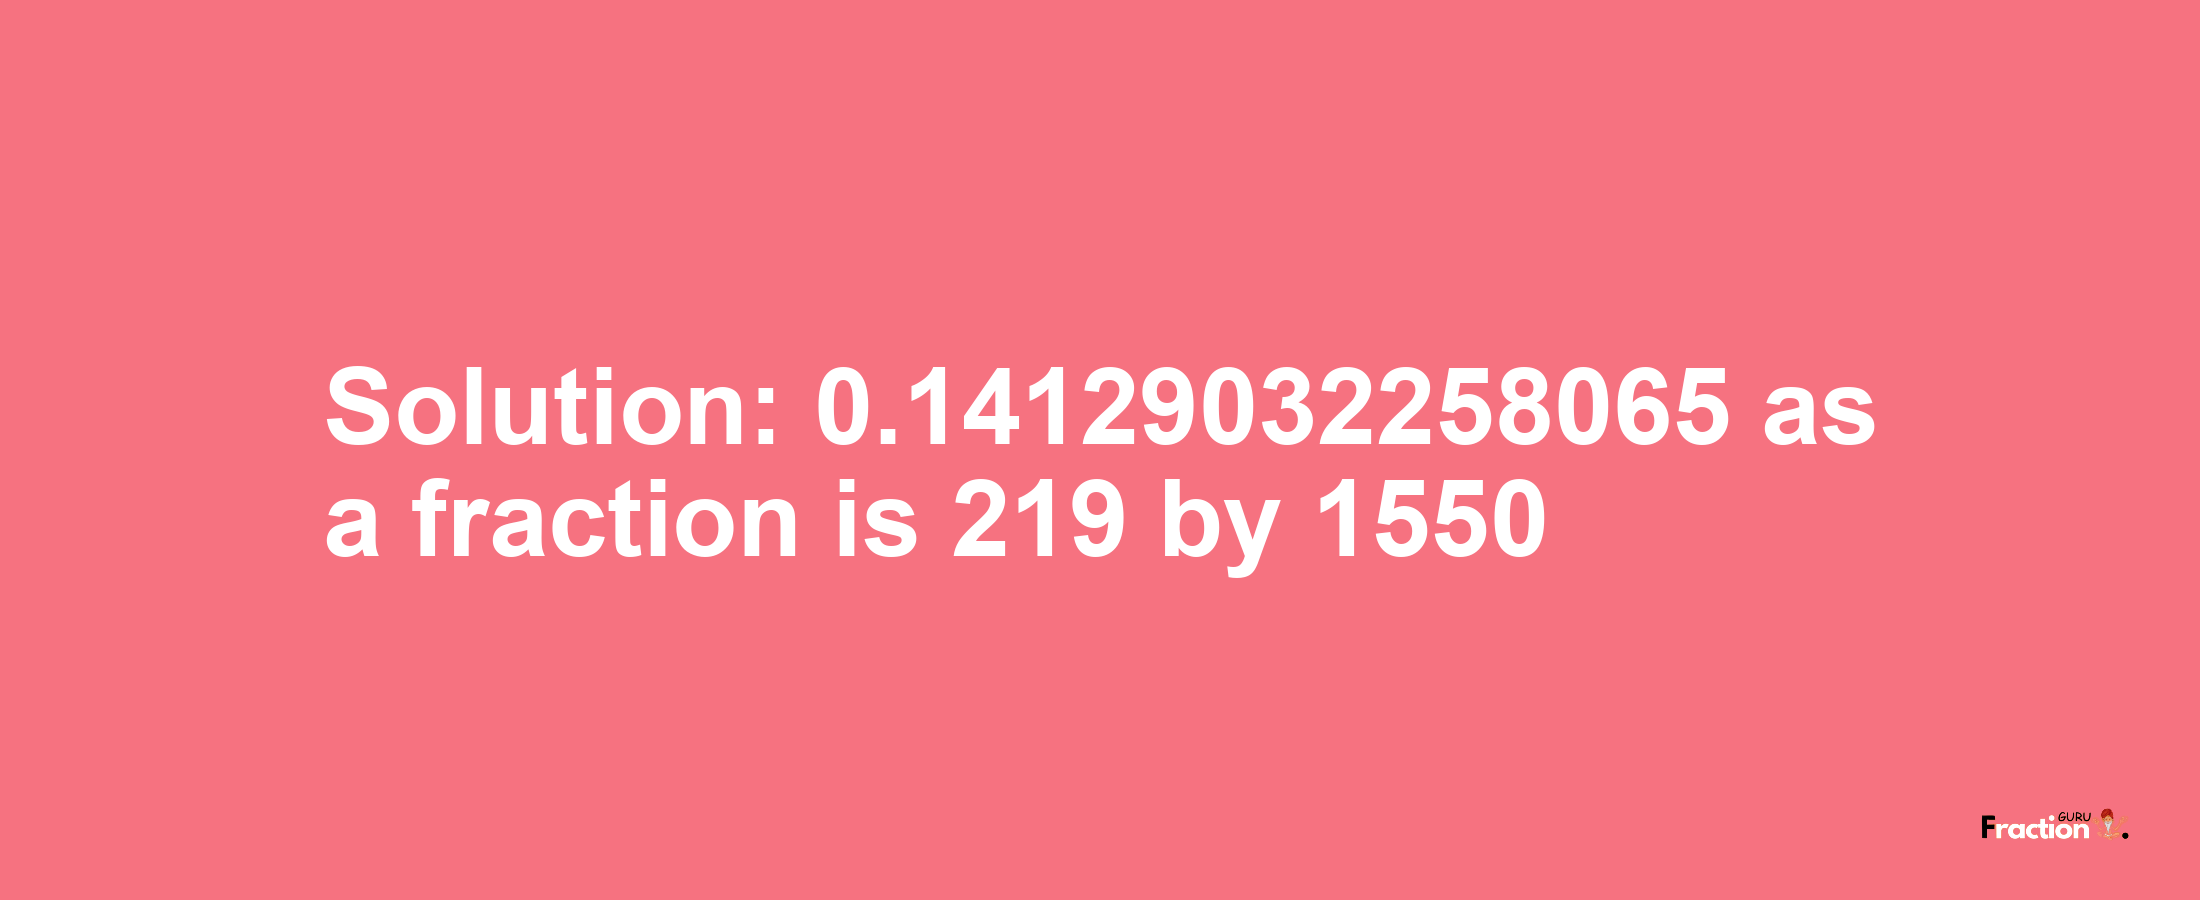 Solution:0.14129032258065 as a fraction is 219/1550